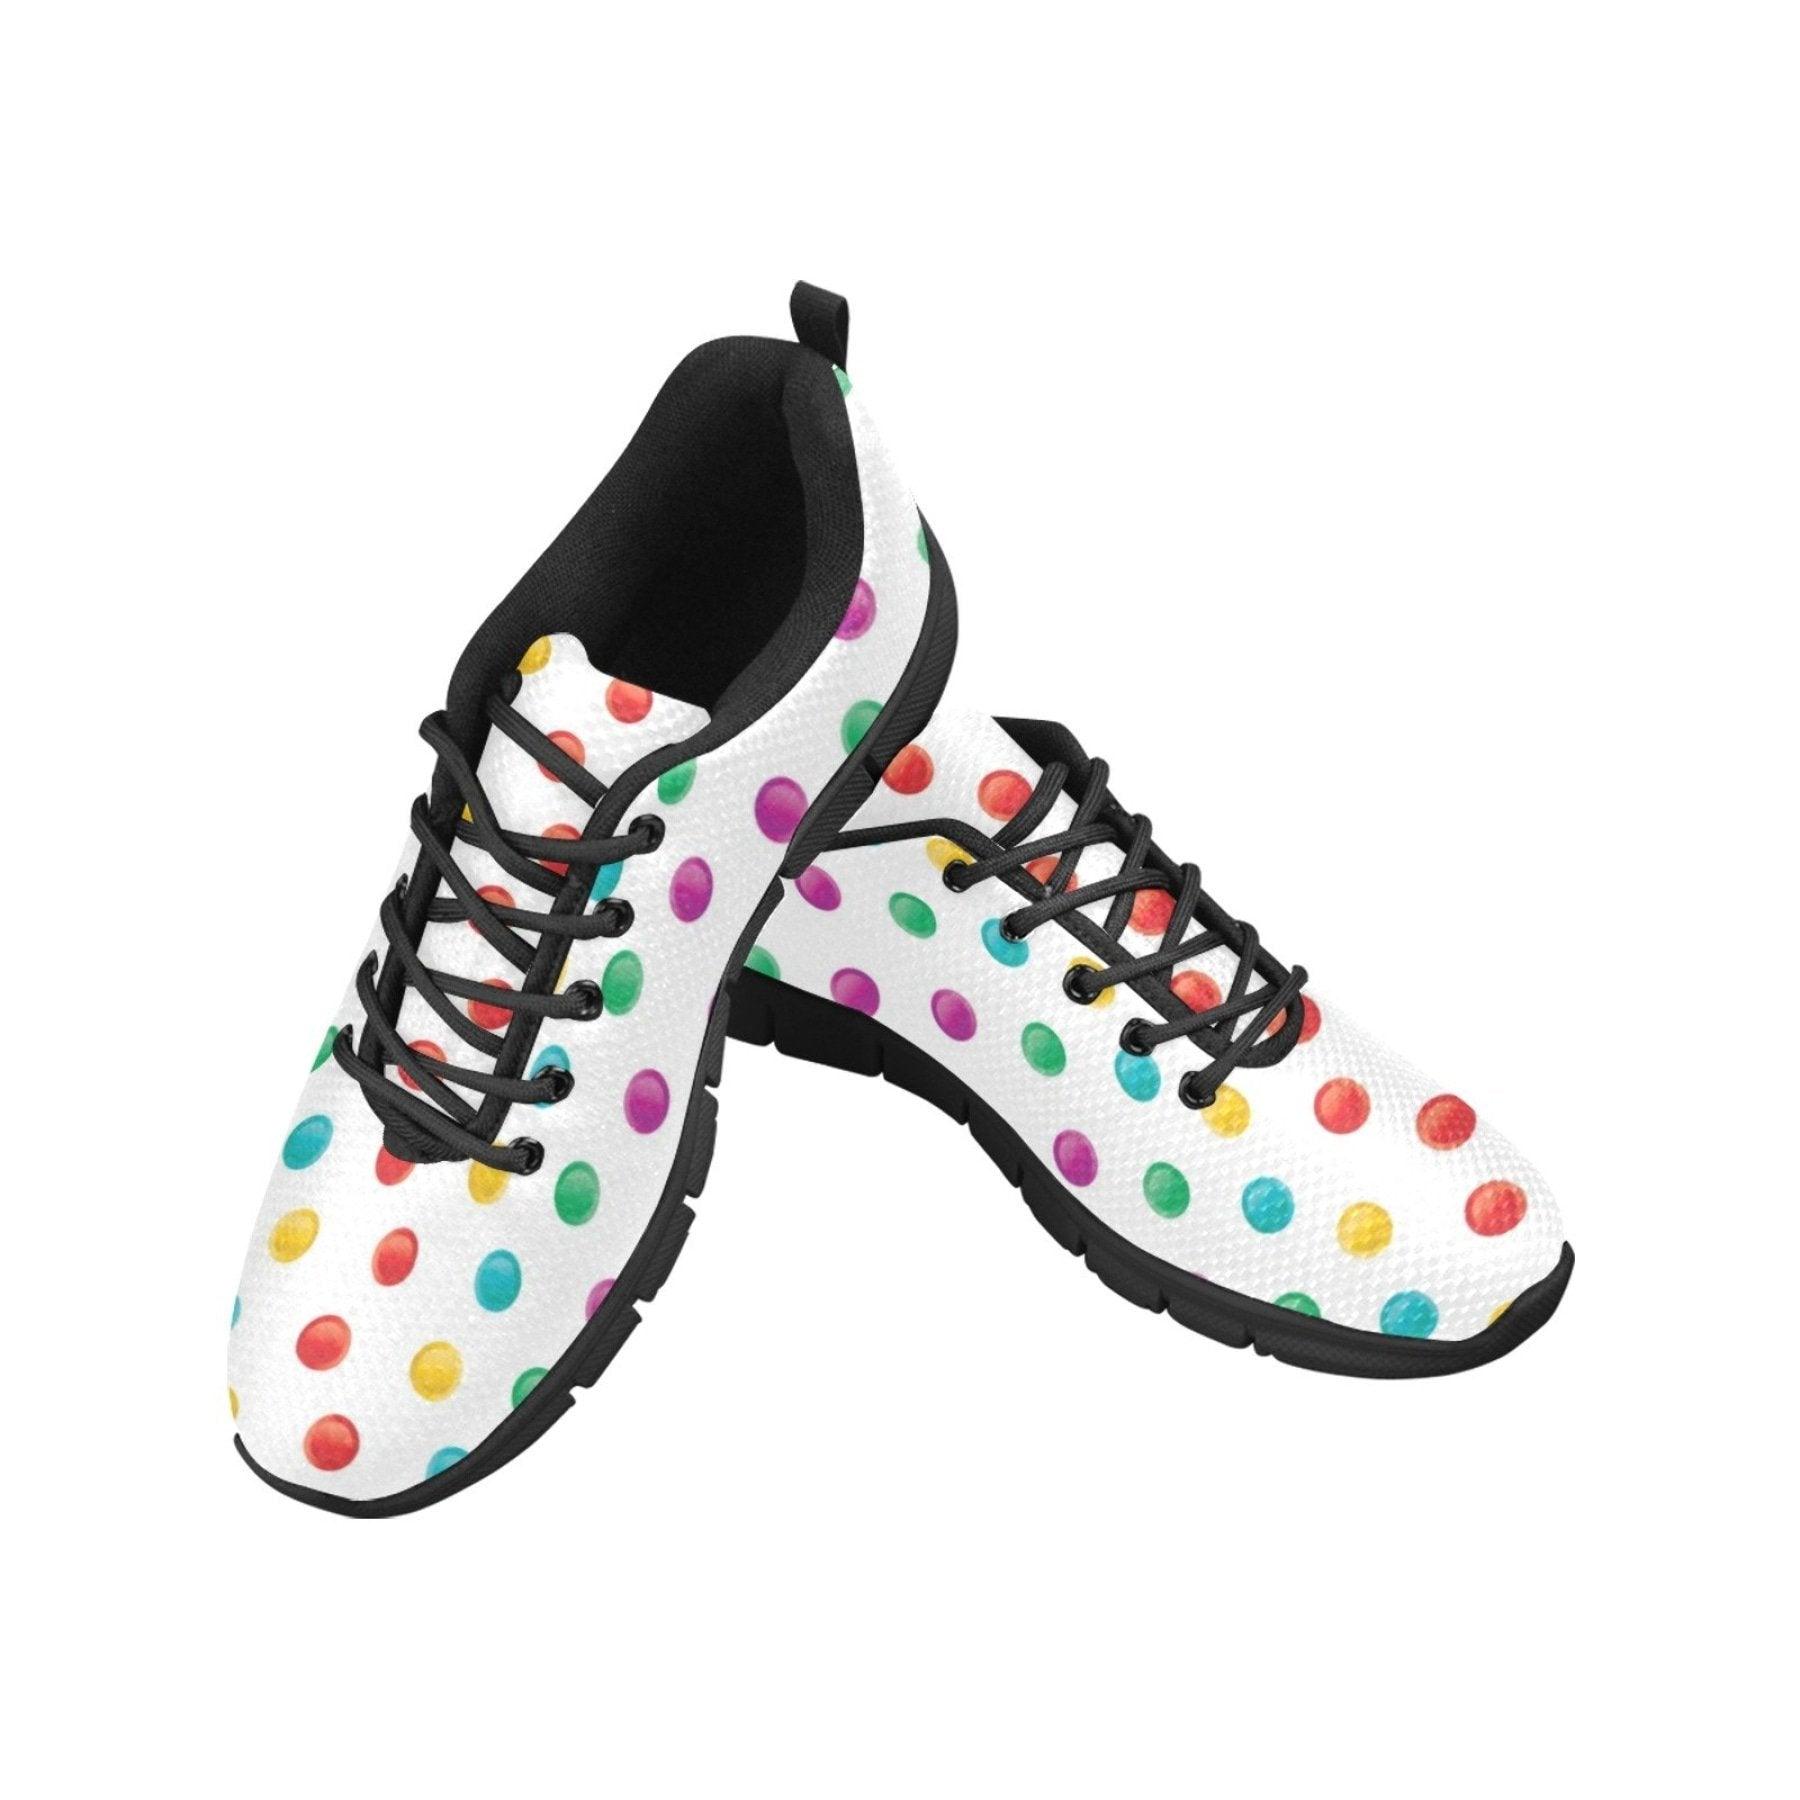 Womens Sneakers, Multicolor Polka Dot Print Running Shoes - VirtuousWares:Global